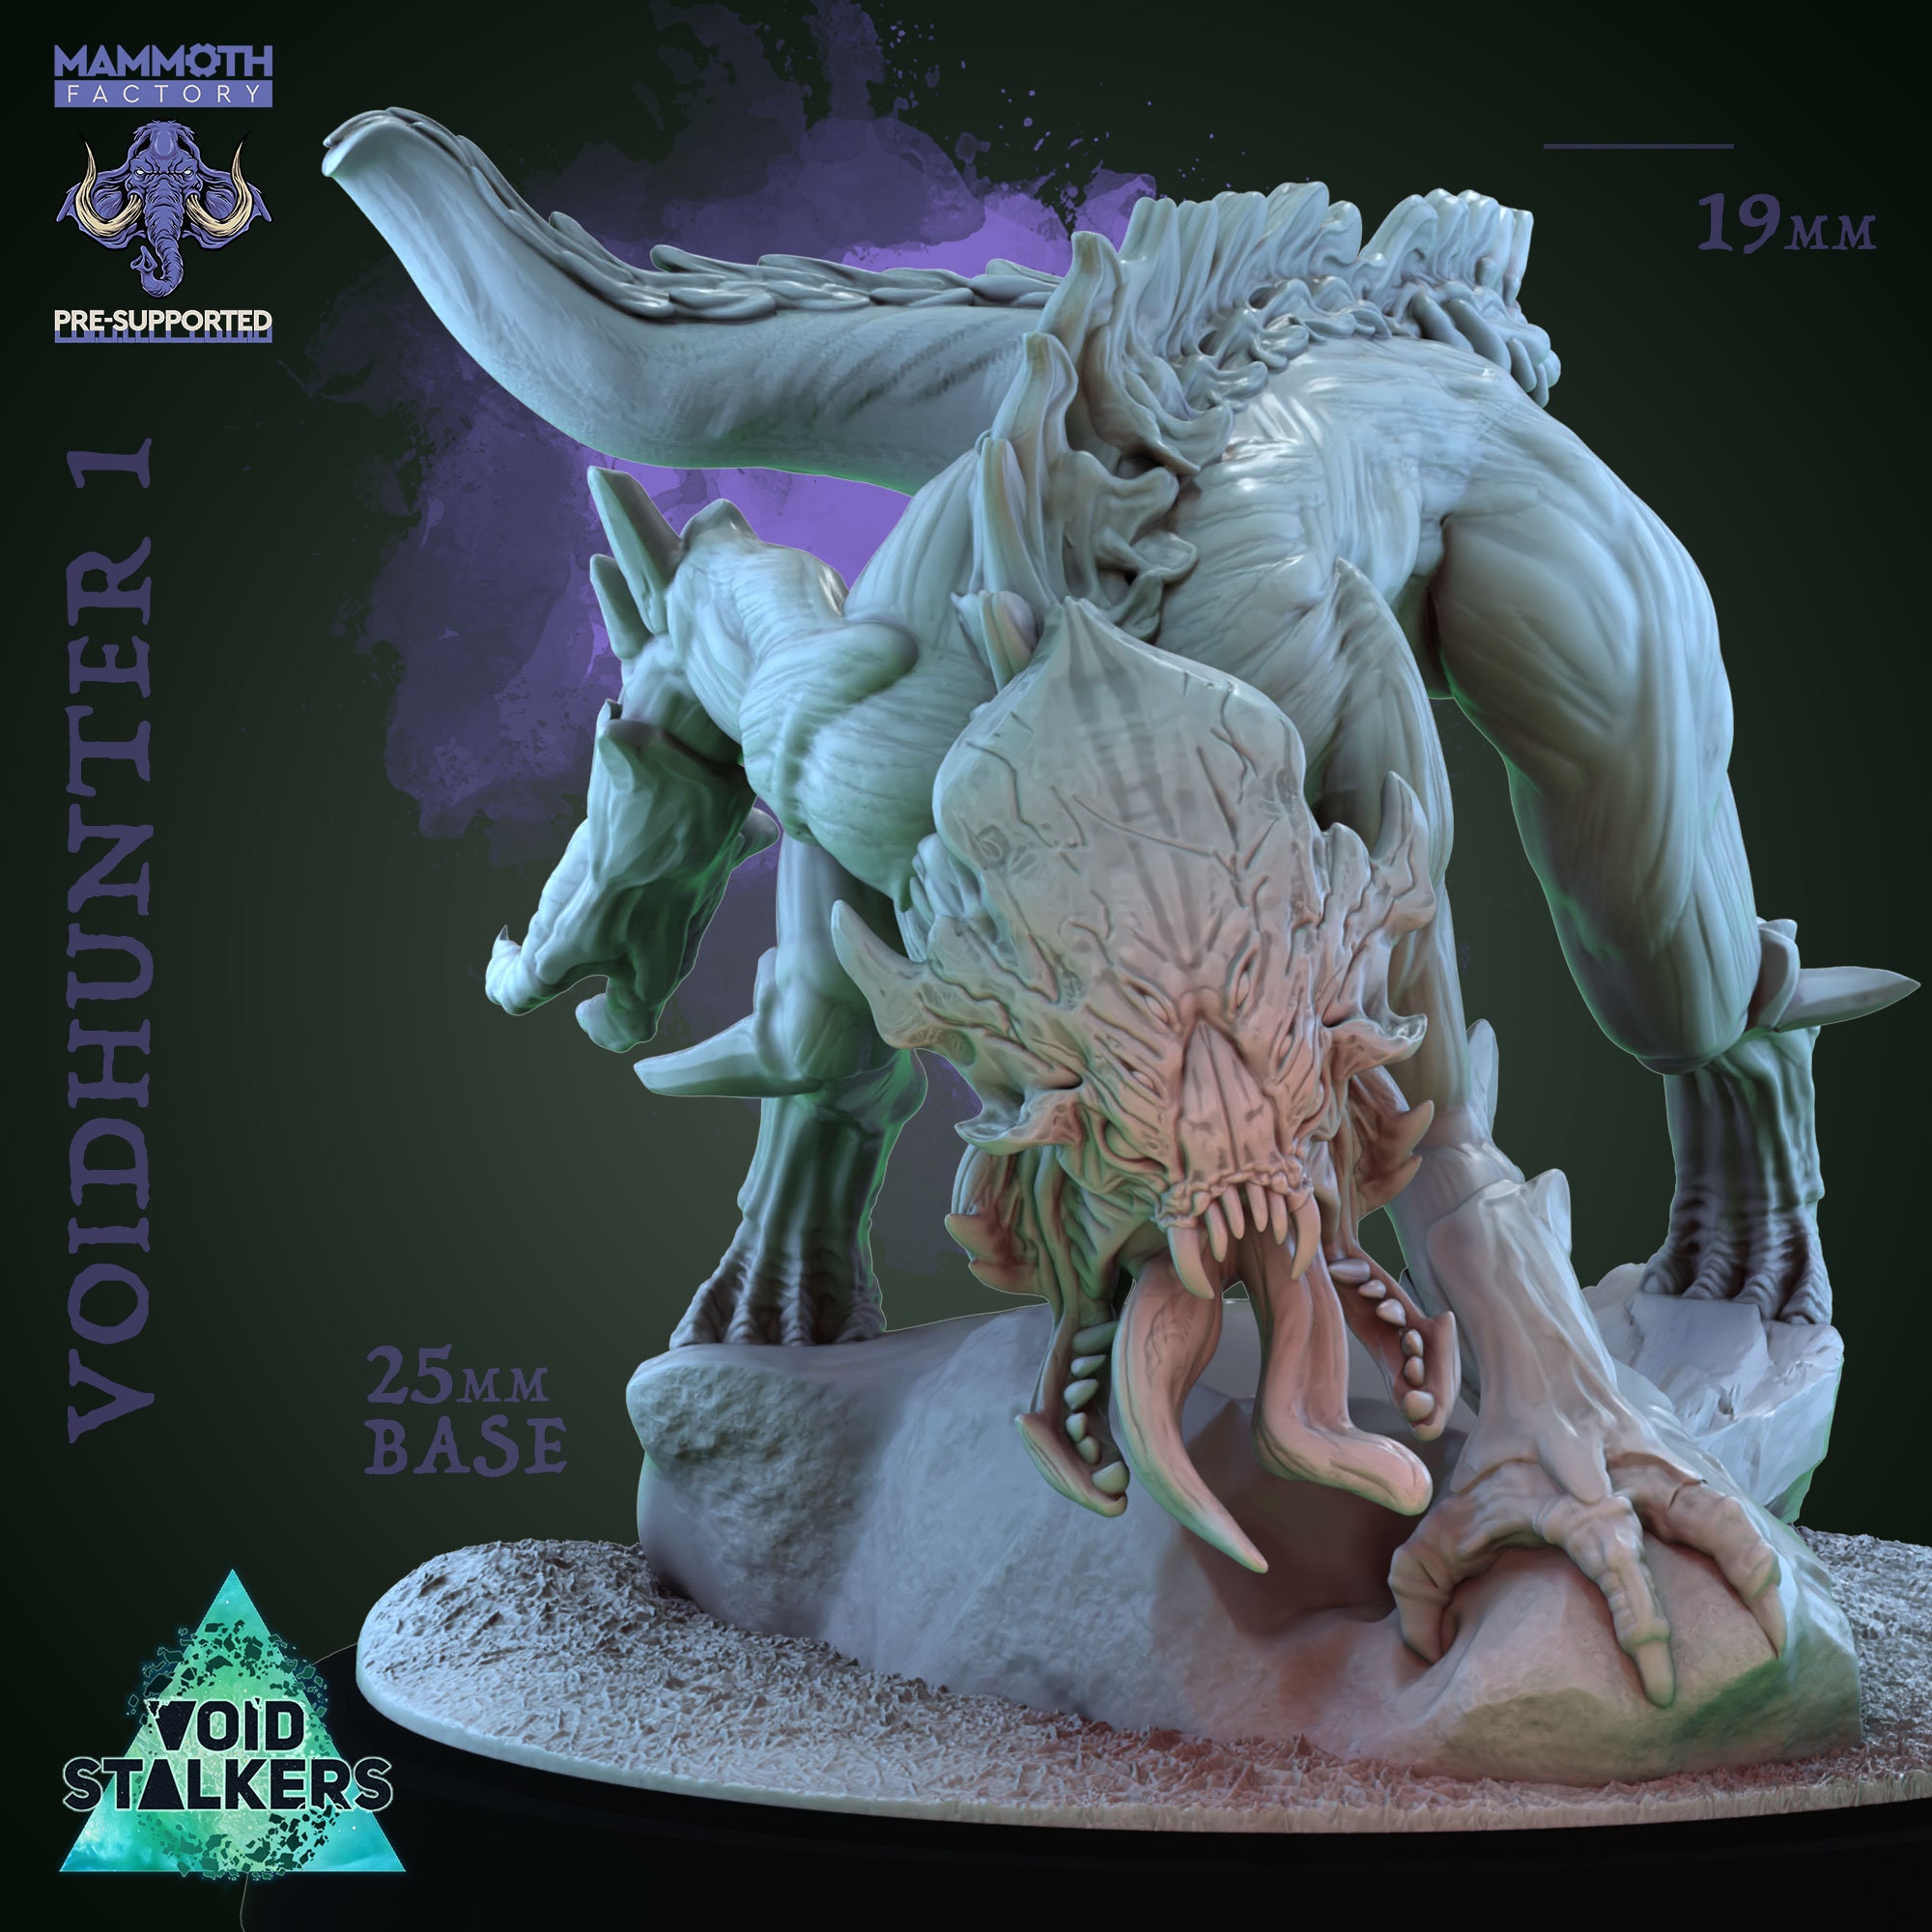 Fiend / Demon D&D 5e Fantasy RPG Tabletop Void Stalkers Yssoloth Voidhunter Miniature Dungeons and Dragons Mammoth Factory